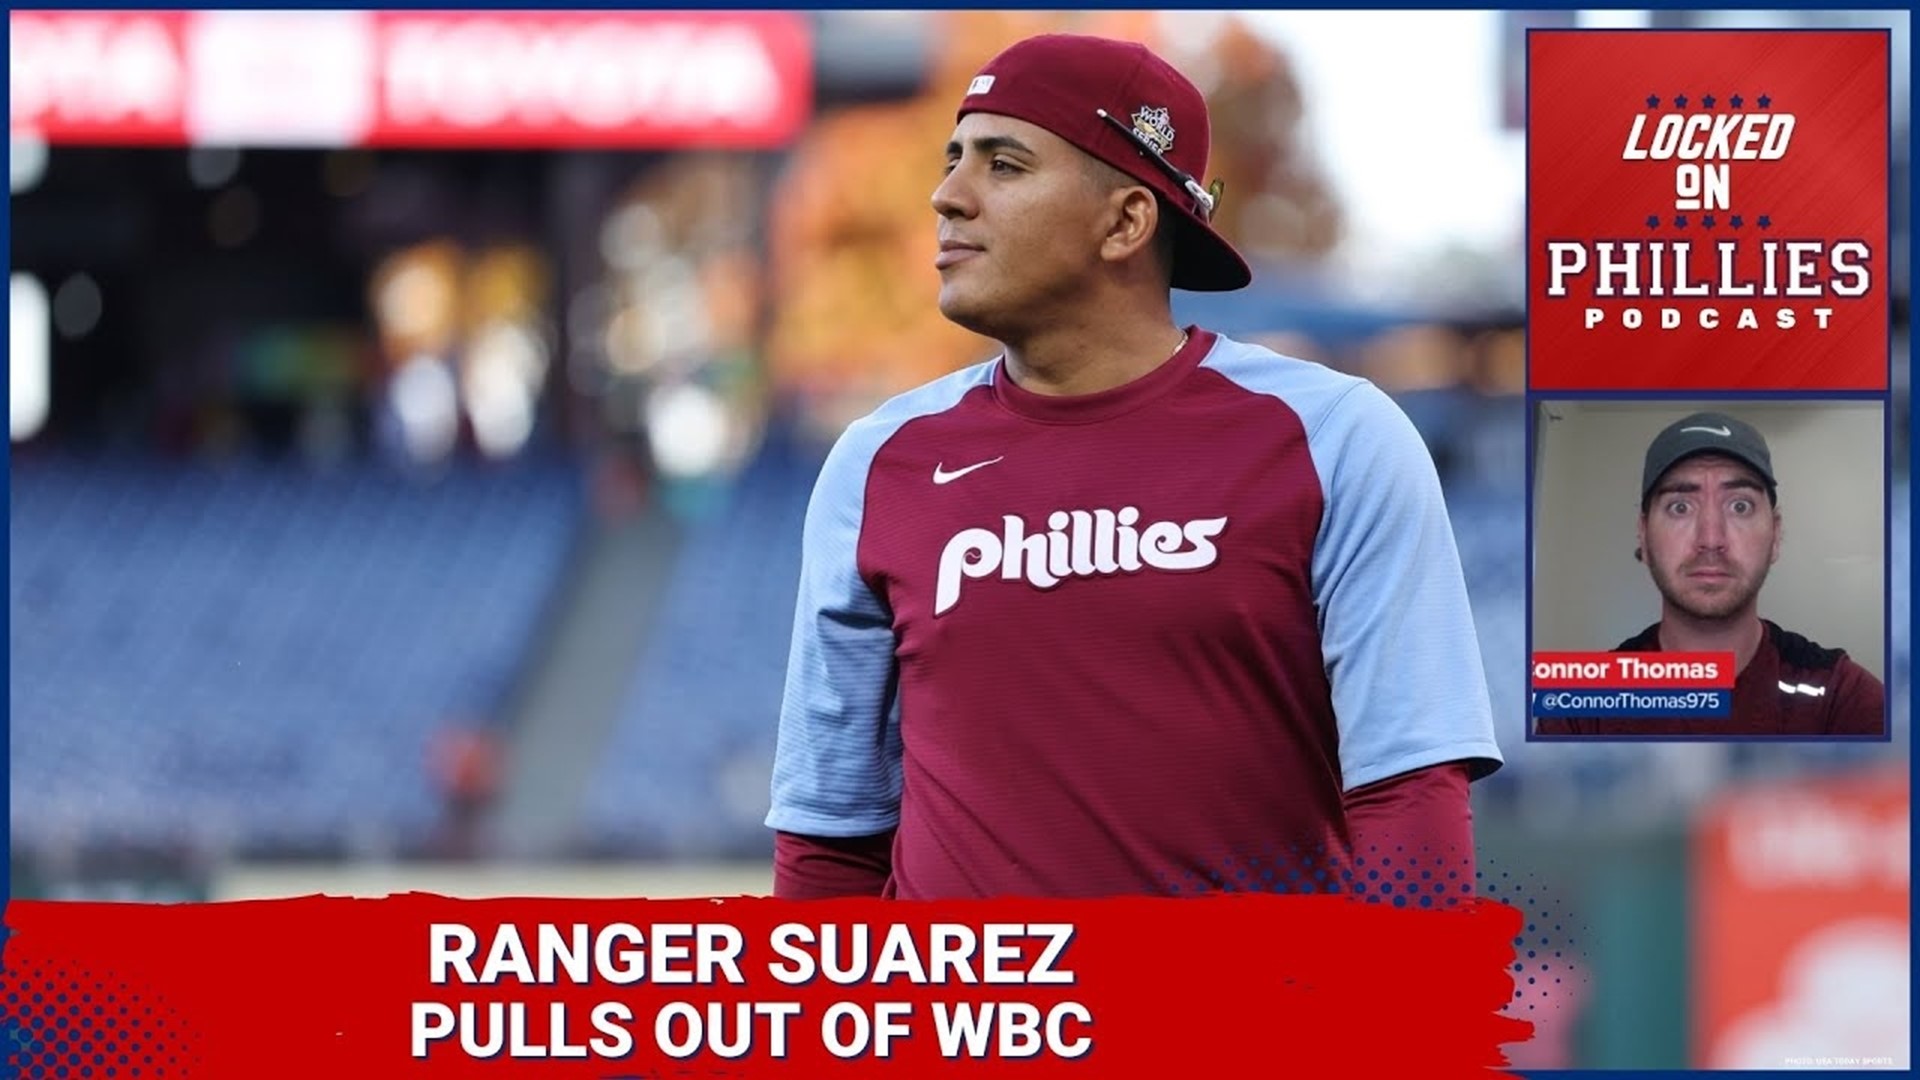 In today's episode, Philadelphia Phillies' starting pitcher Ranger Suarez has returned to Spring Training from the World Baseball Classic.